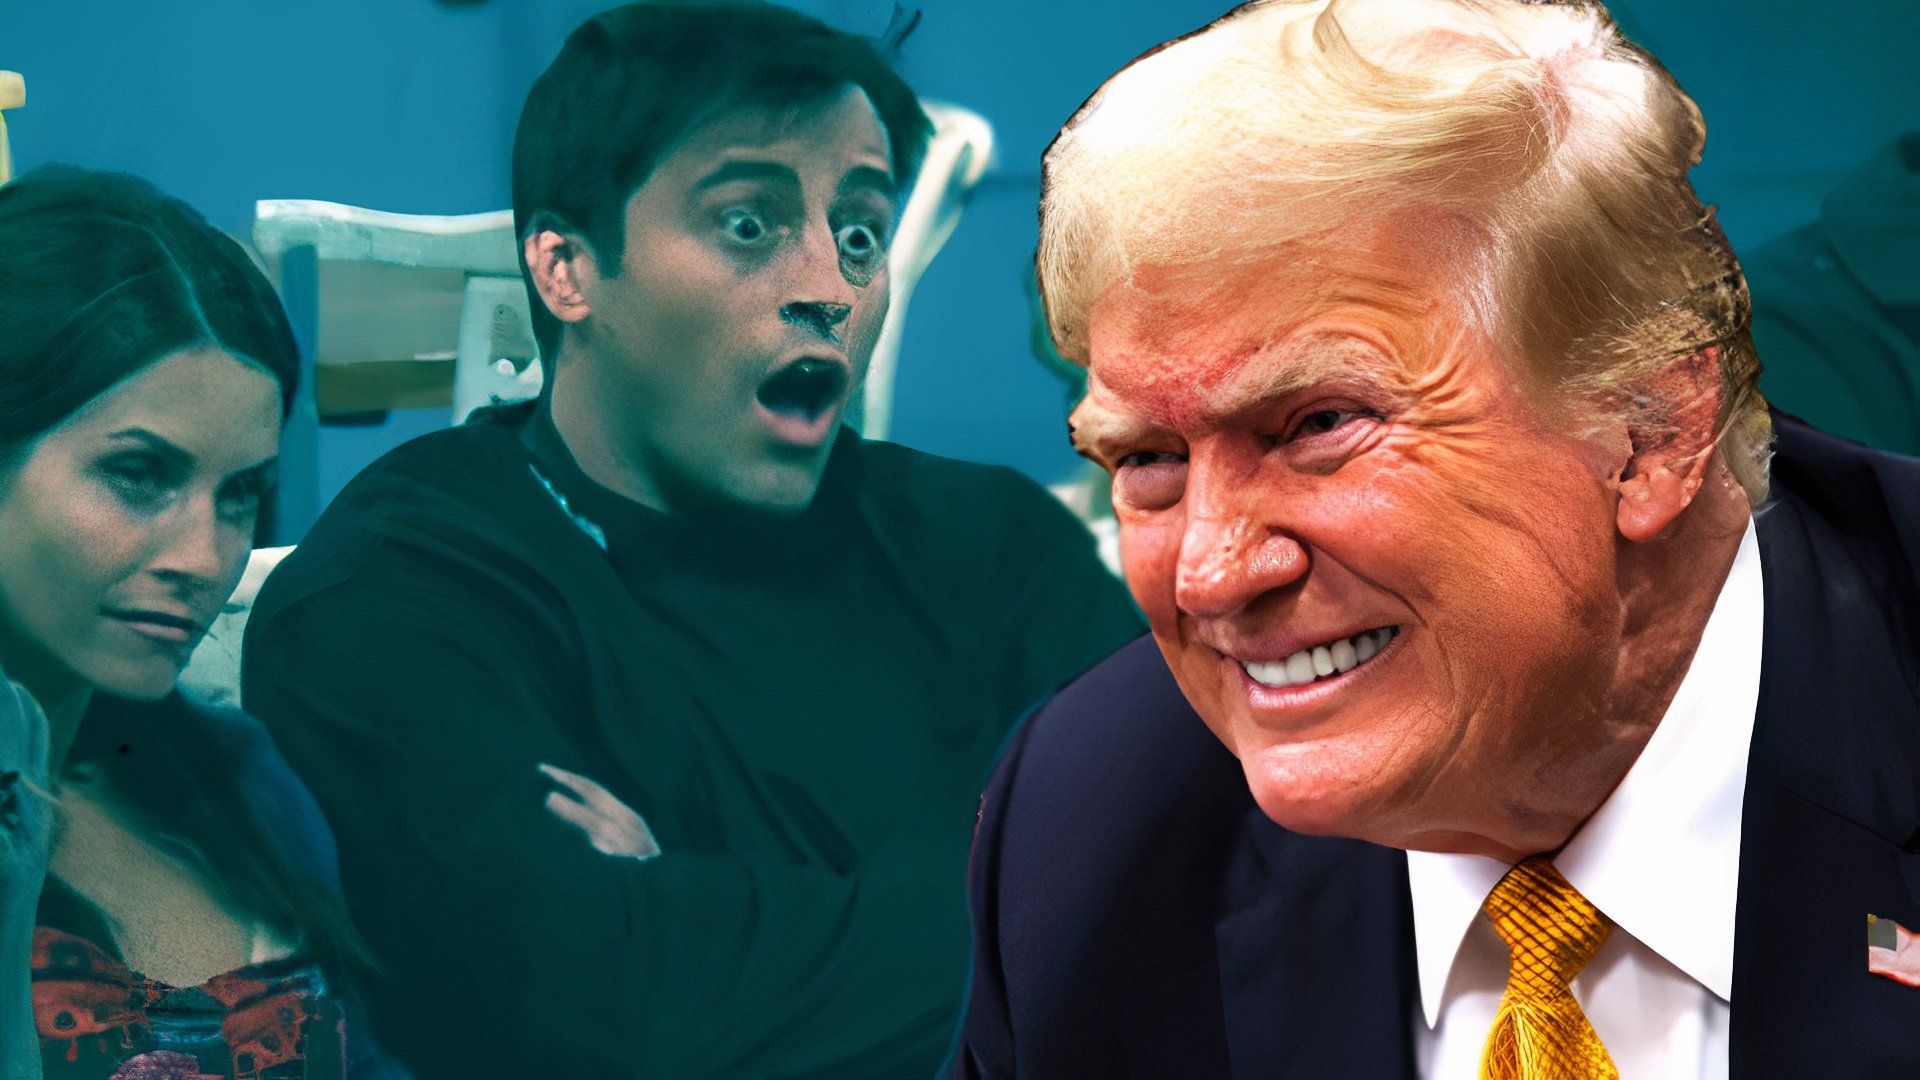 Leering Donald Trump and shocked Joey from Friends